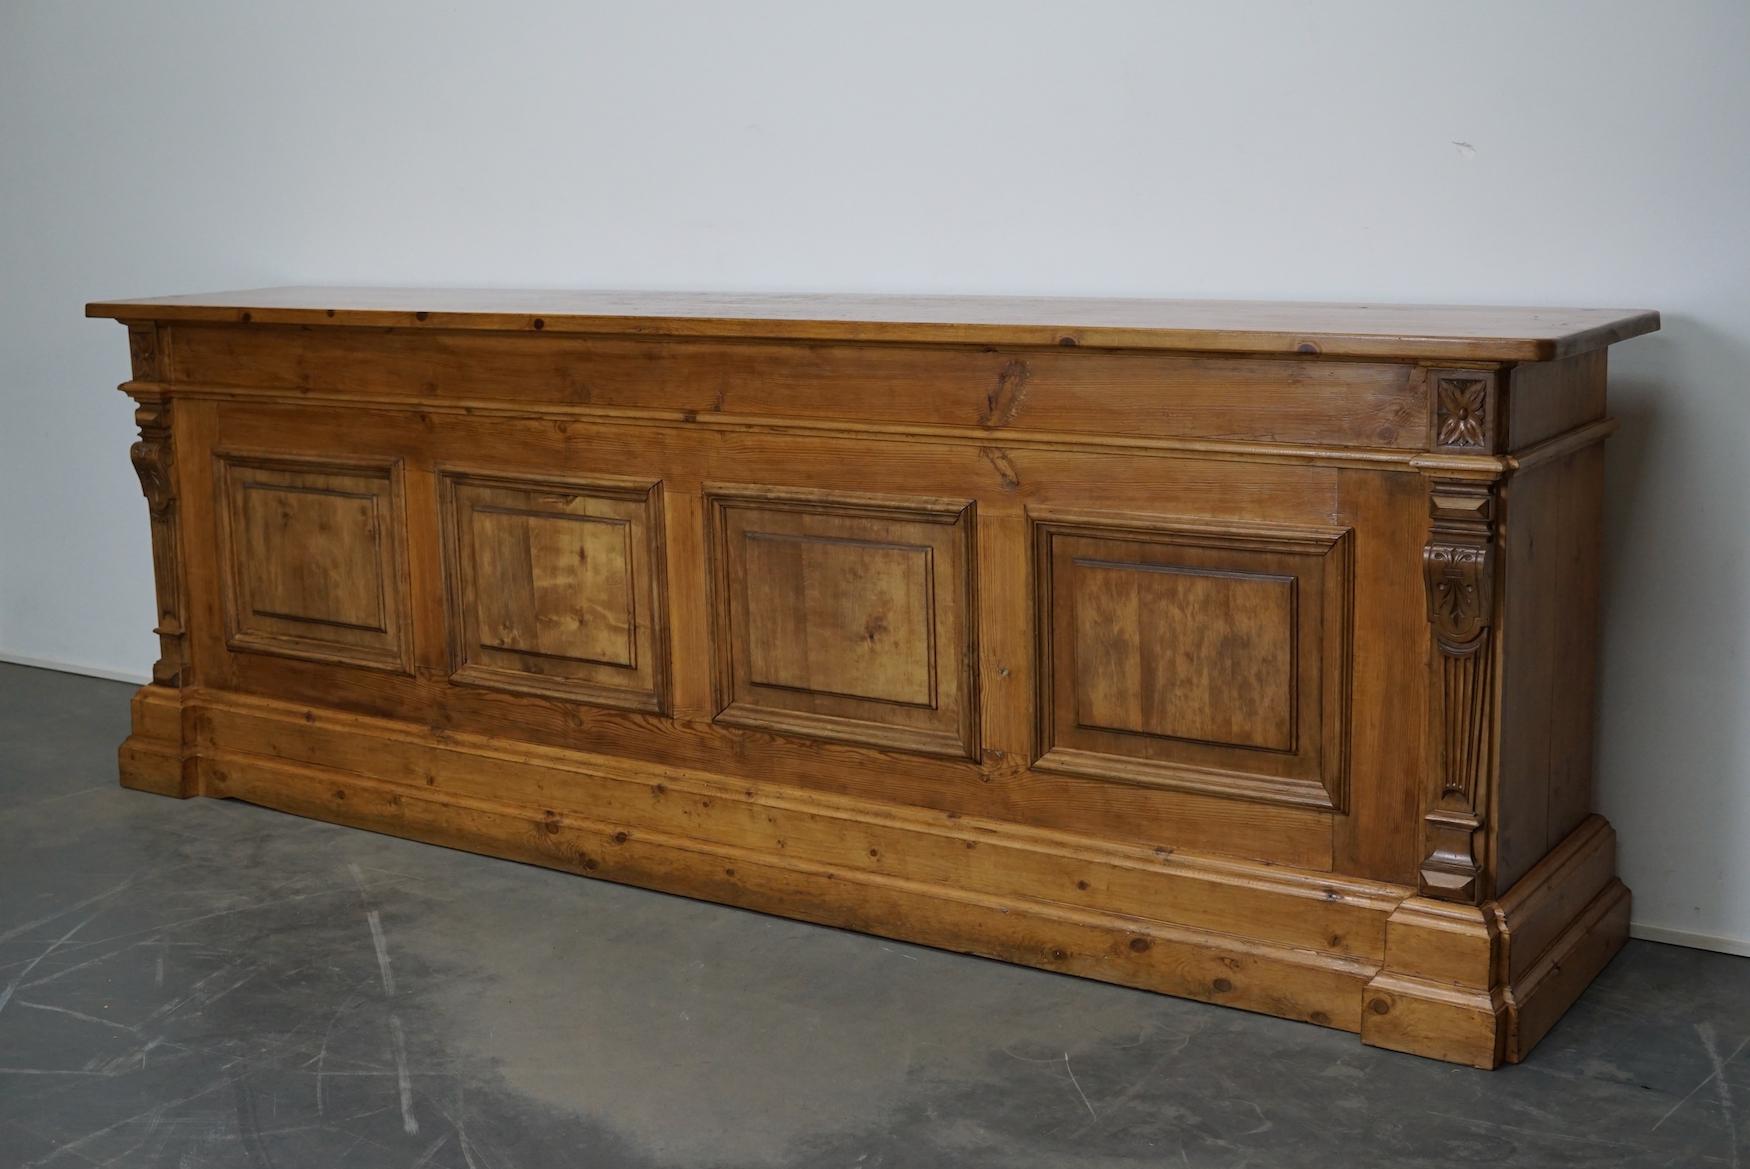 This cabinet was produced during the early 20th century in Germany. This piece features 16 large drawers with nice pine knobs. The back of the cabinet is paneled as it was used as a shop counter. The interior dimensions of the drawers are: DWH 32 x